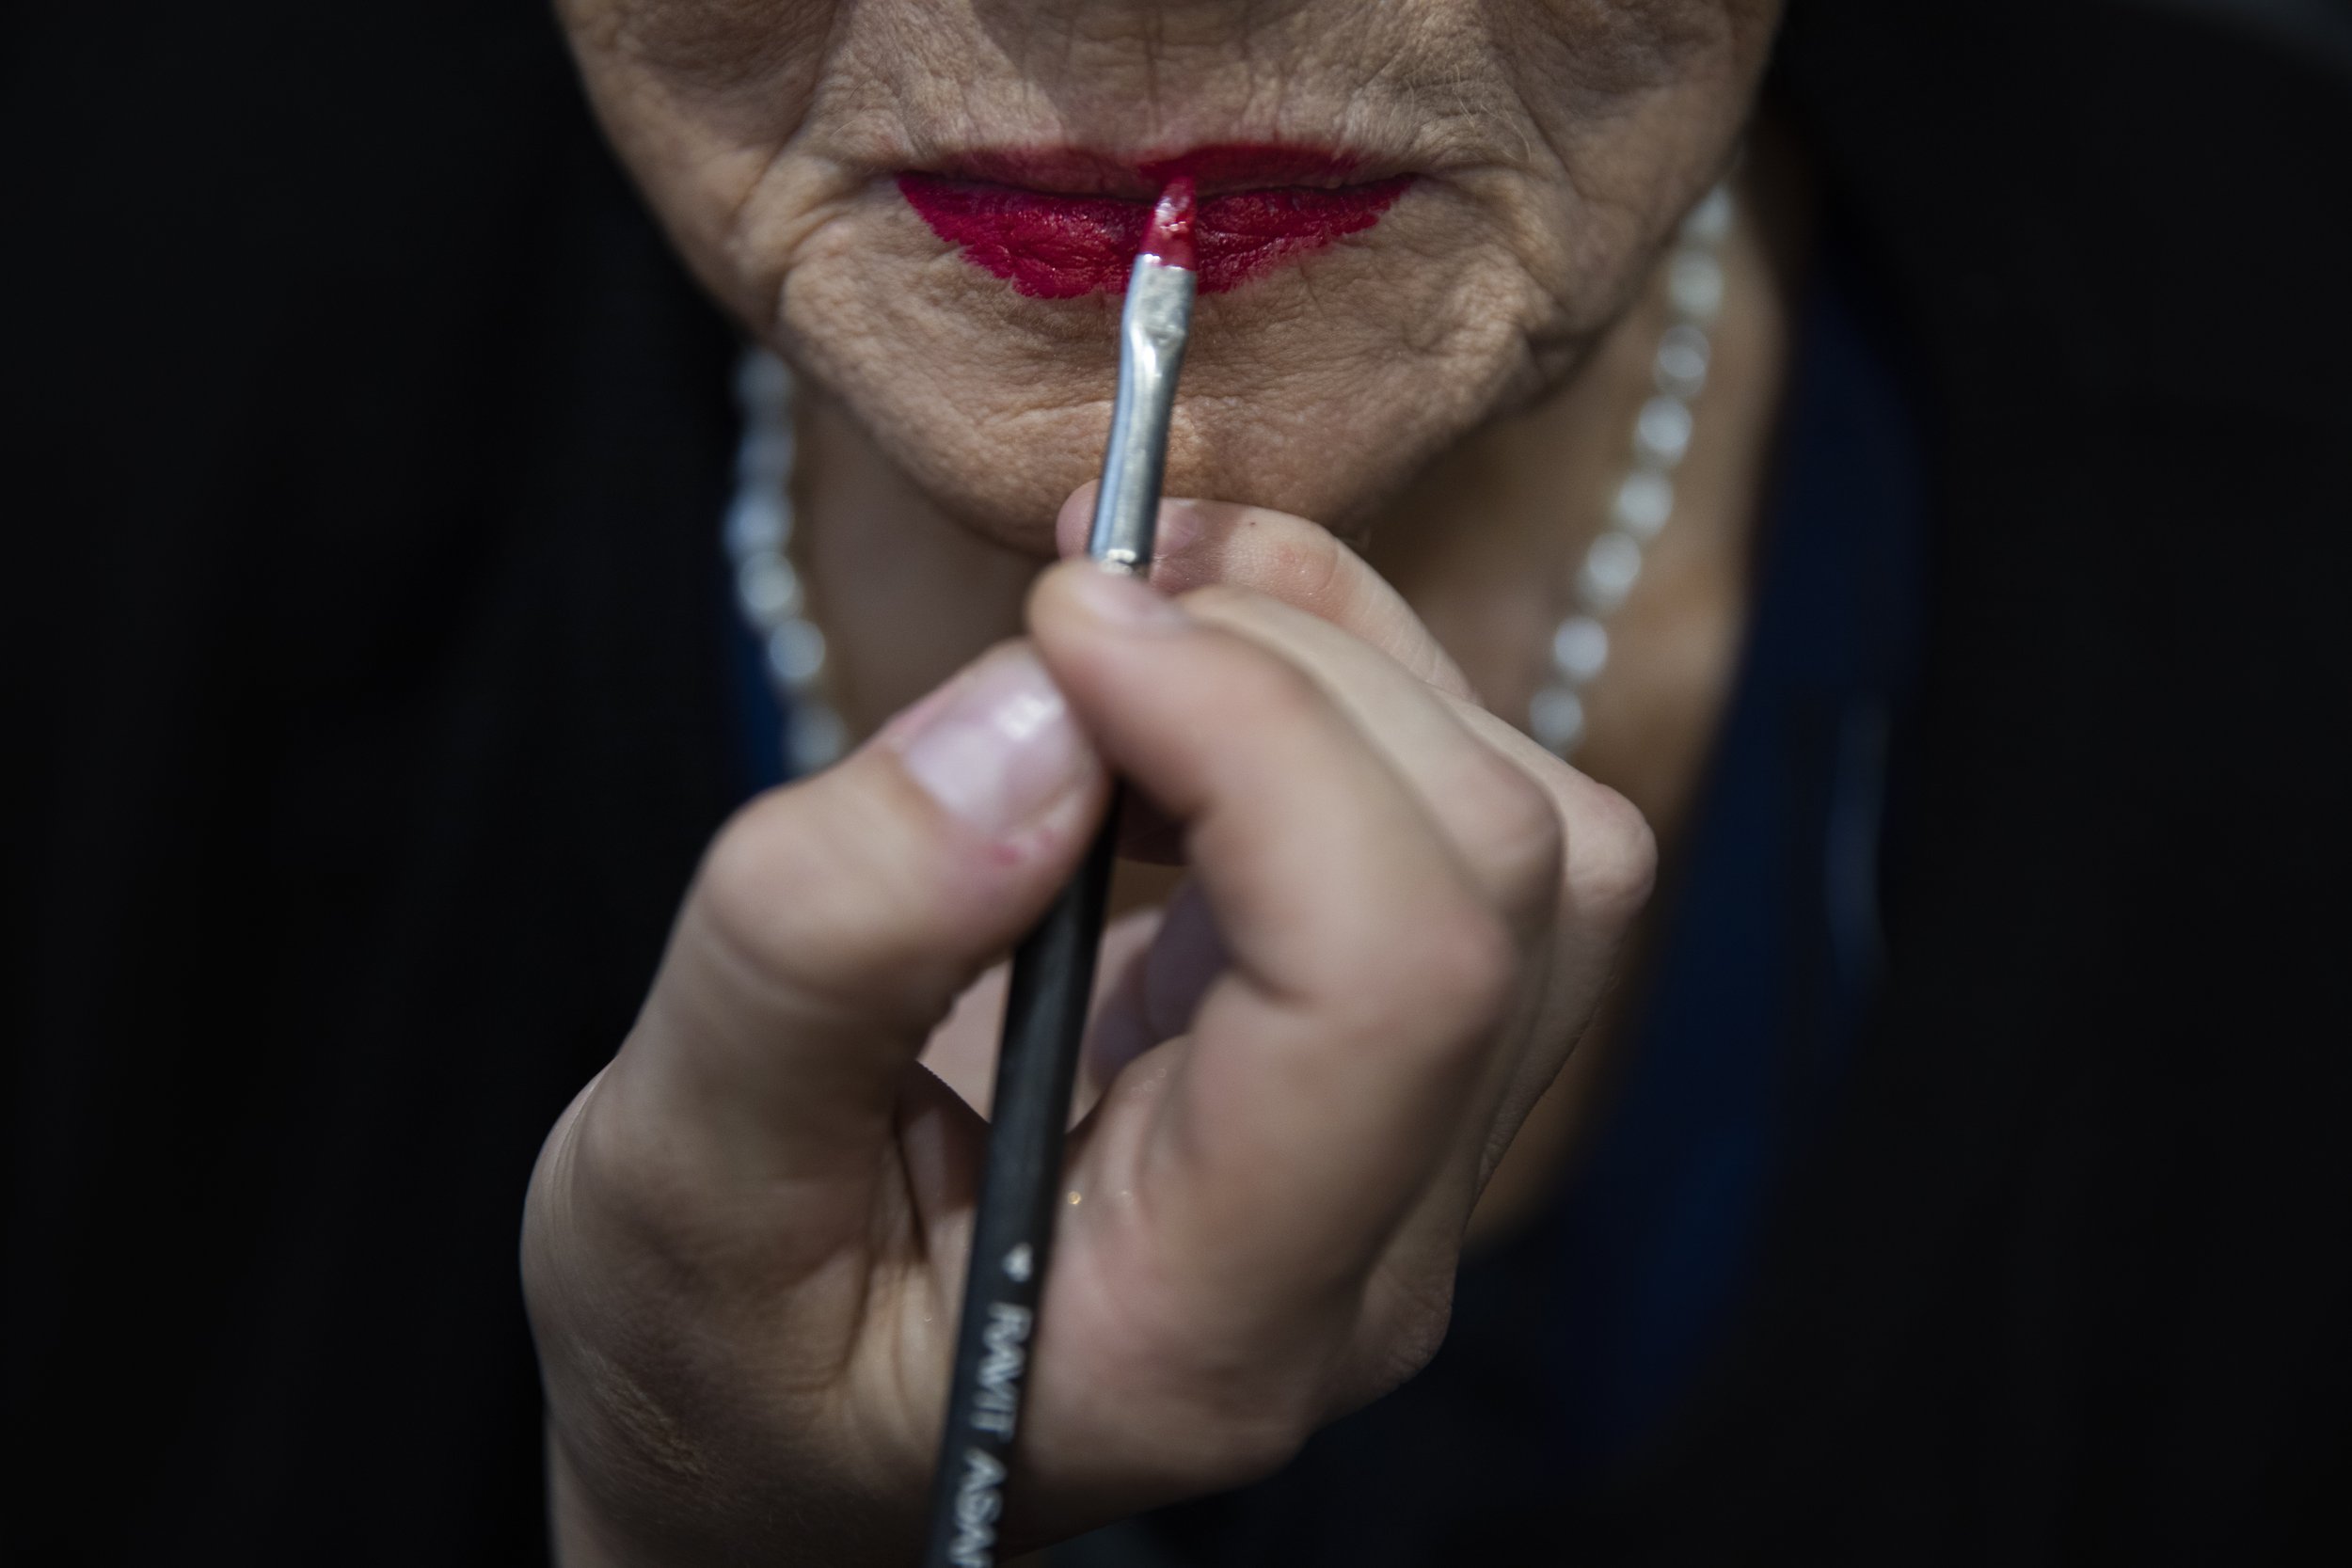  Holocaust survivor Rivka Papo, 87, gets makeup applied during a special beauty pageant honoring Holocaust survivors in Jerusalem, on Nov. 16, 2021. (AP Photo/Oded Balilty) 